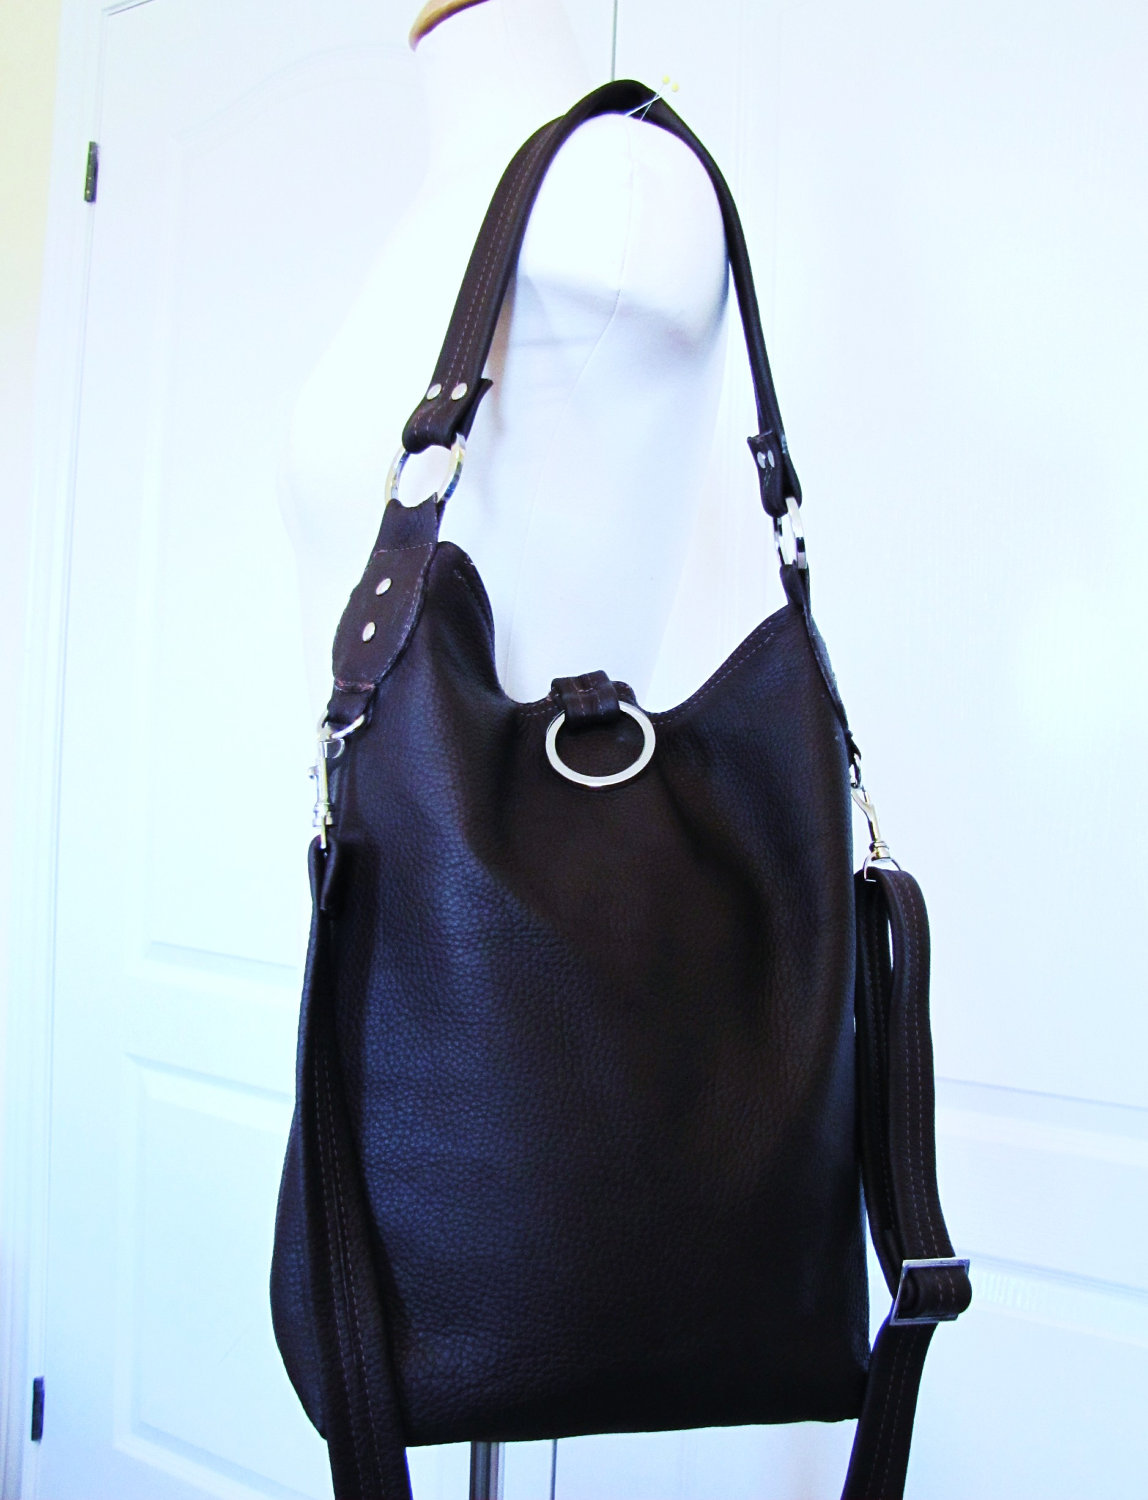 Brown Leather Slim Purse, Fold Over Tote Bag, Large Size, 3 Way Slouchy Bag - Chocolate